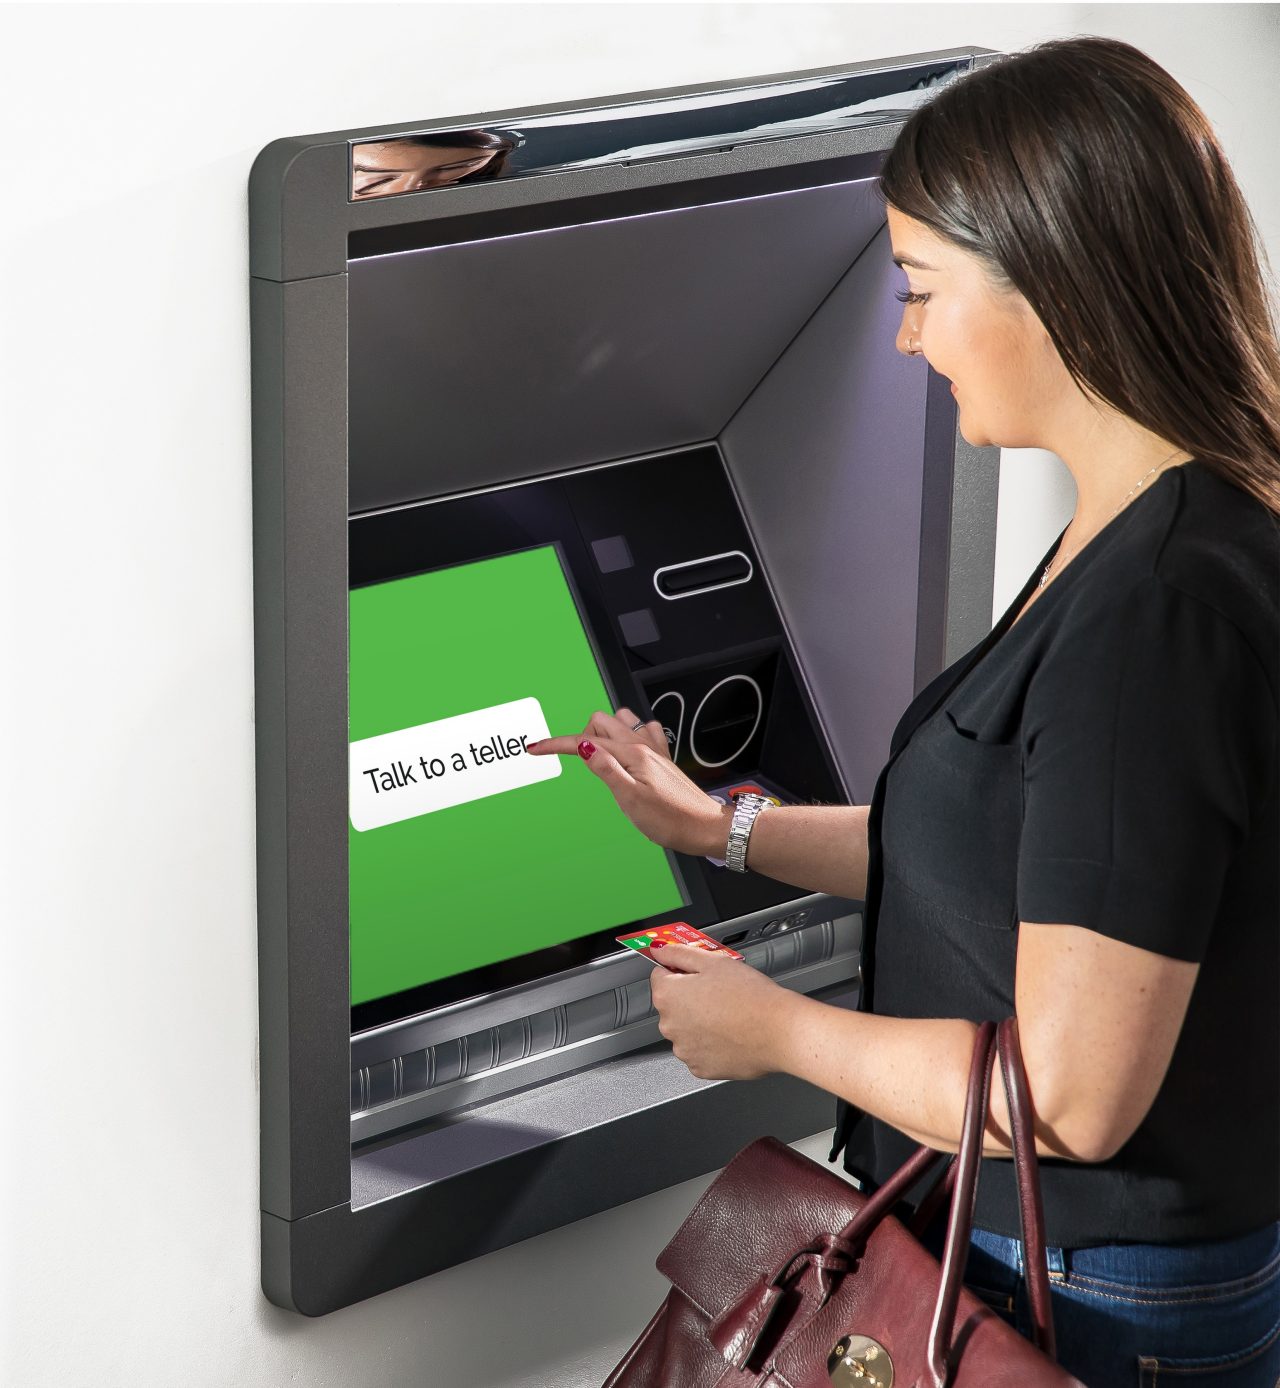 A young woman using an Interactive Teller machine